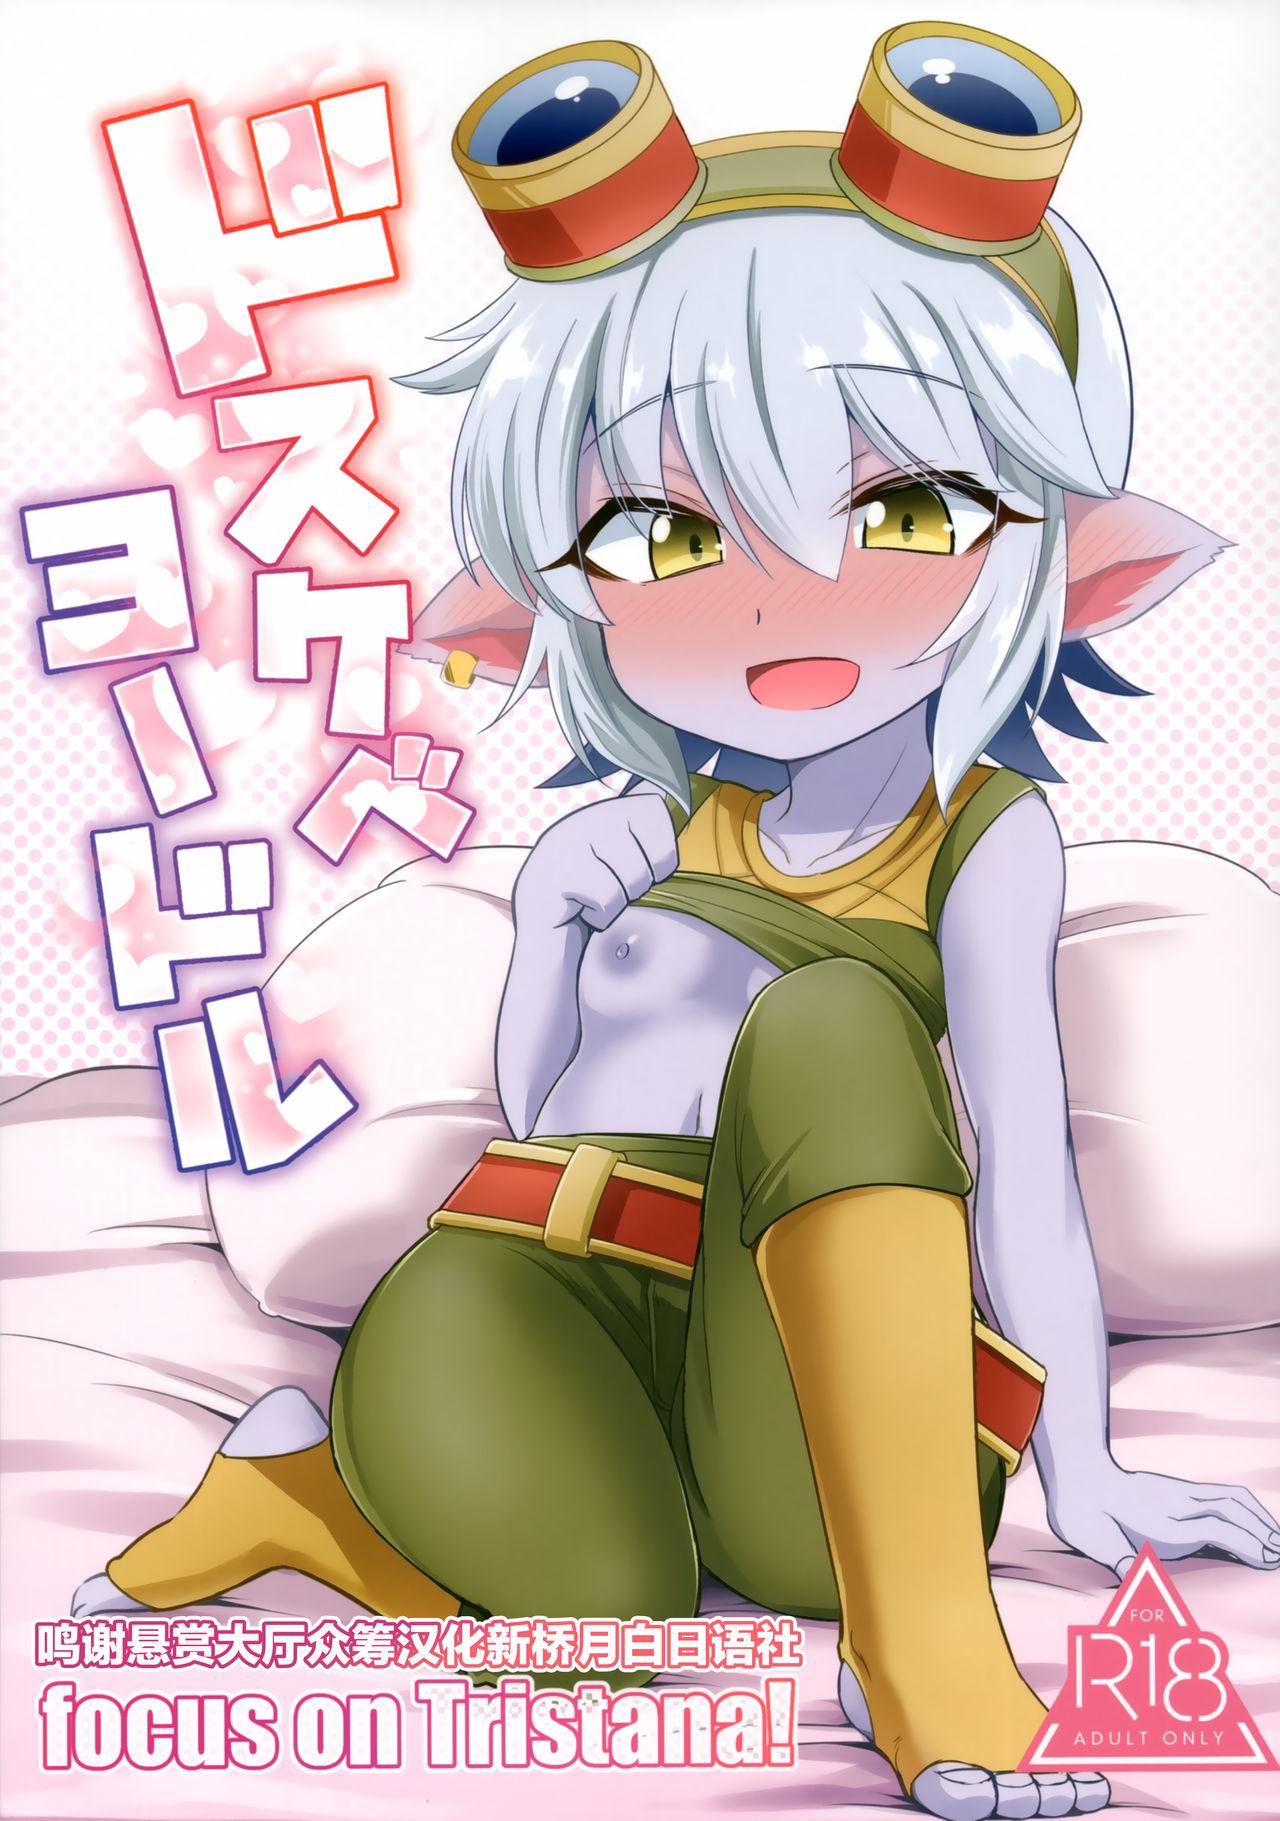 Family Taboo Dosukebe Yodle focus on tristana! - League of legends Soft - Page 1